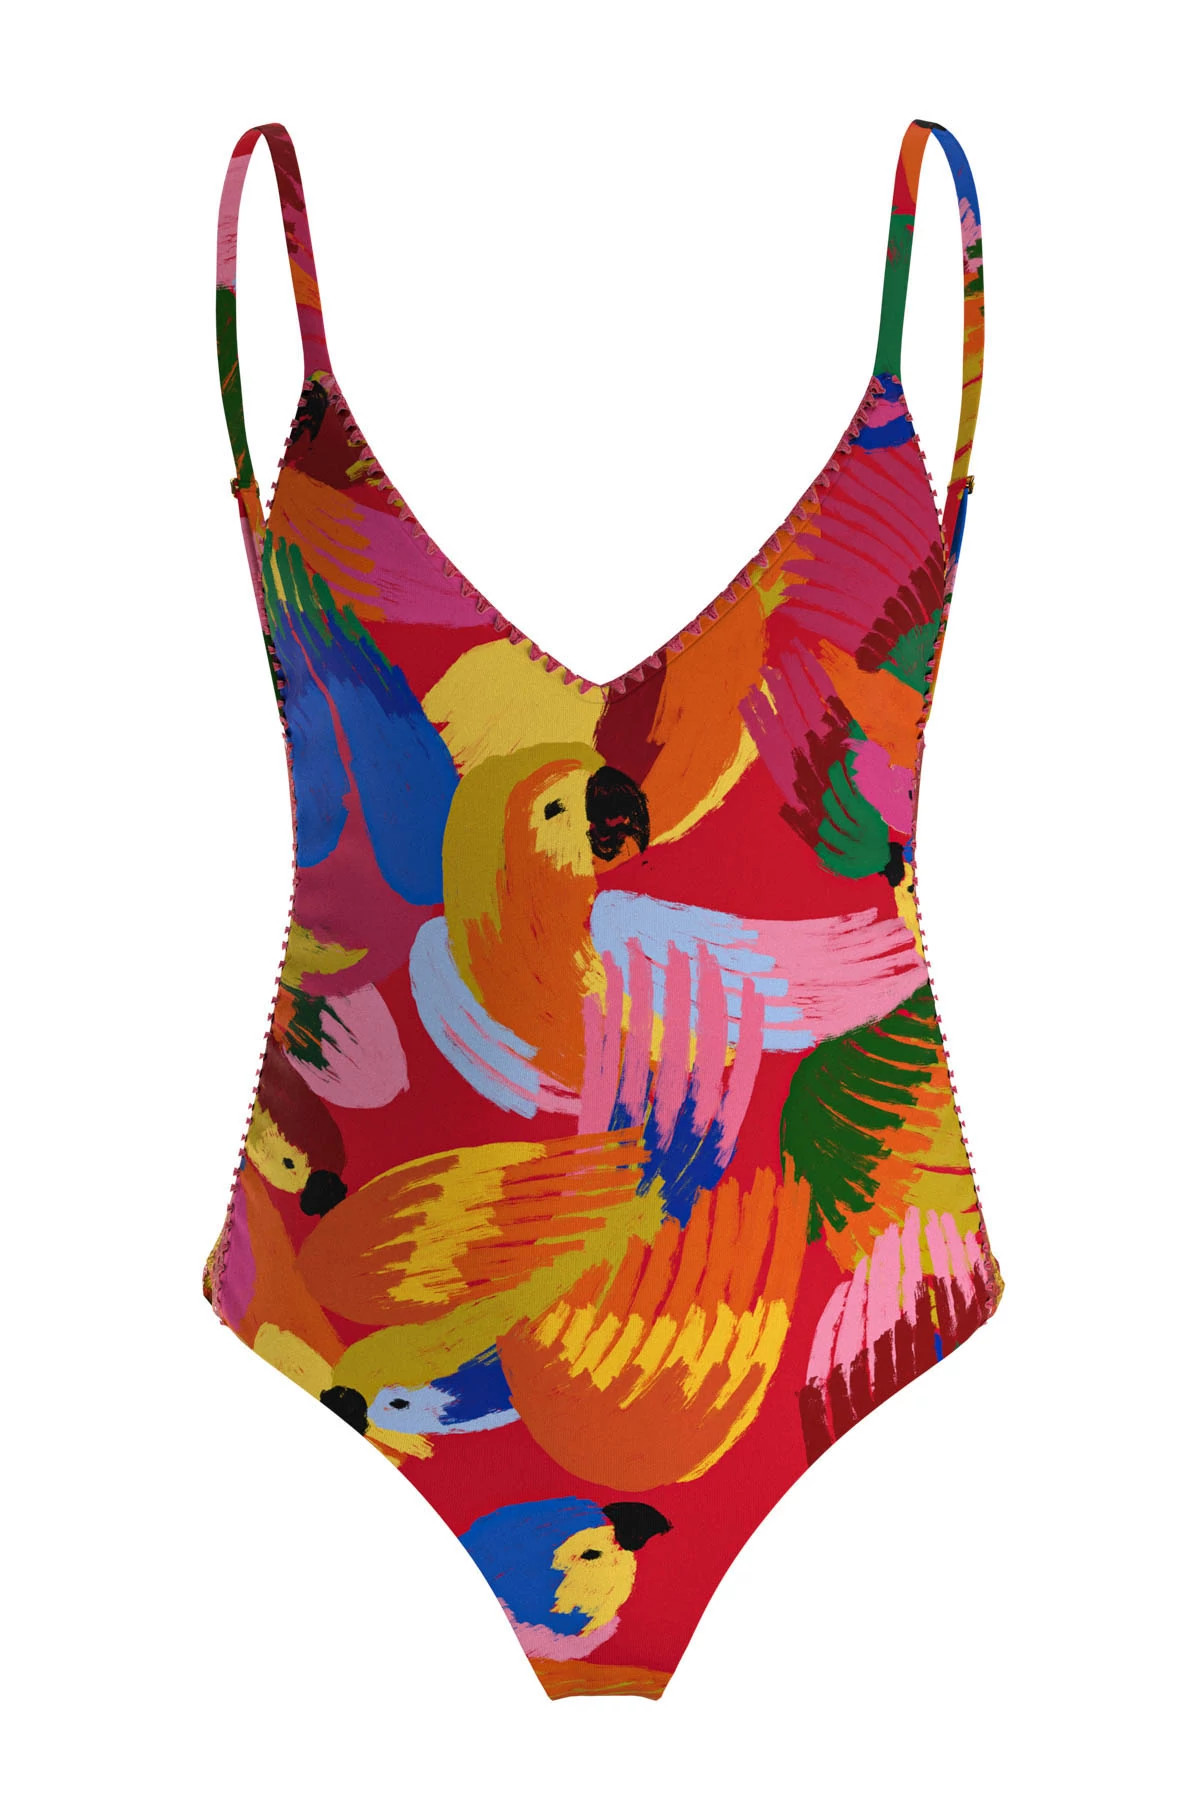 MACAW PARTY Macaw Party Plunge One Piece Swimsuit image number 5